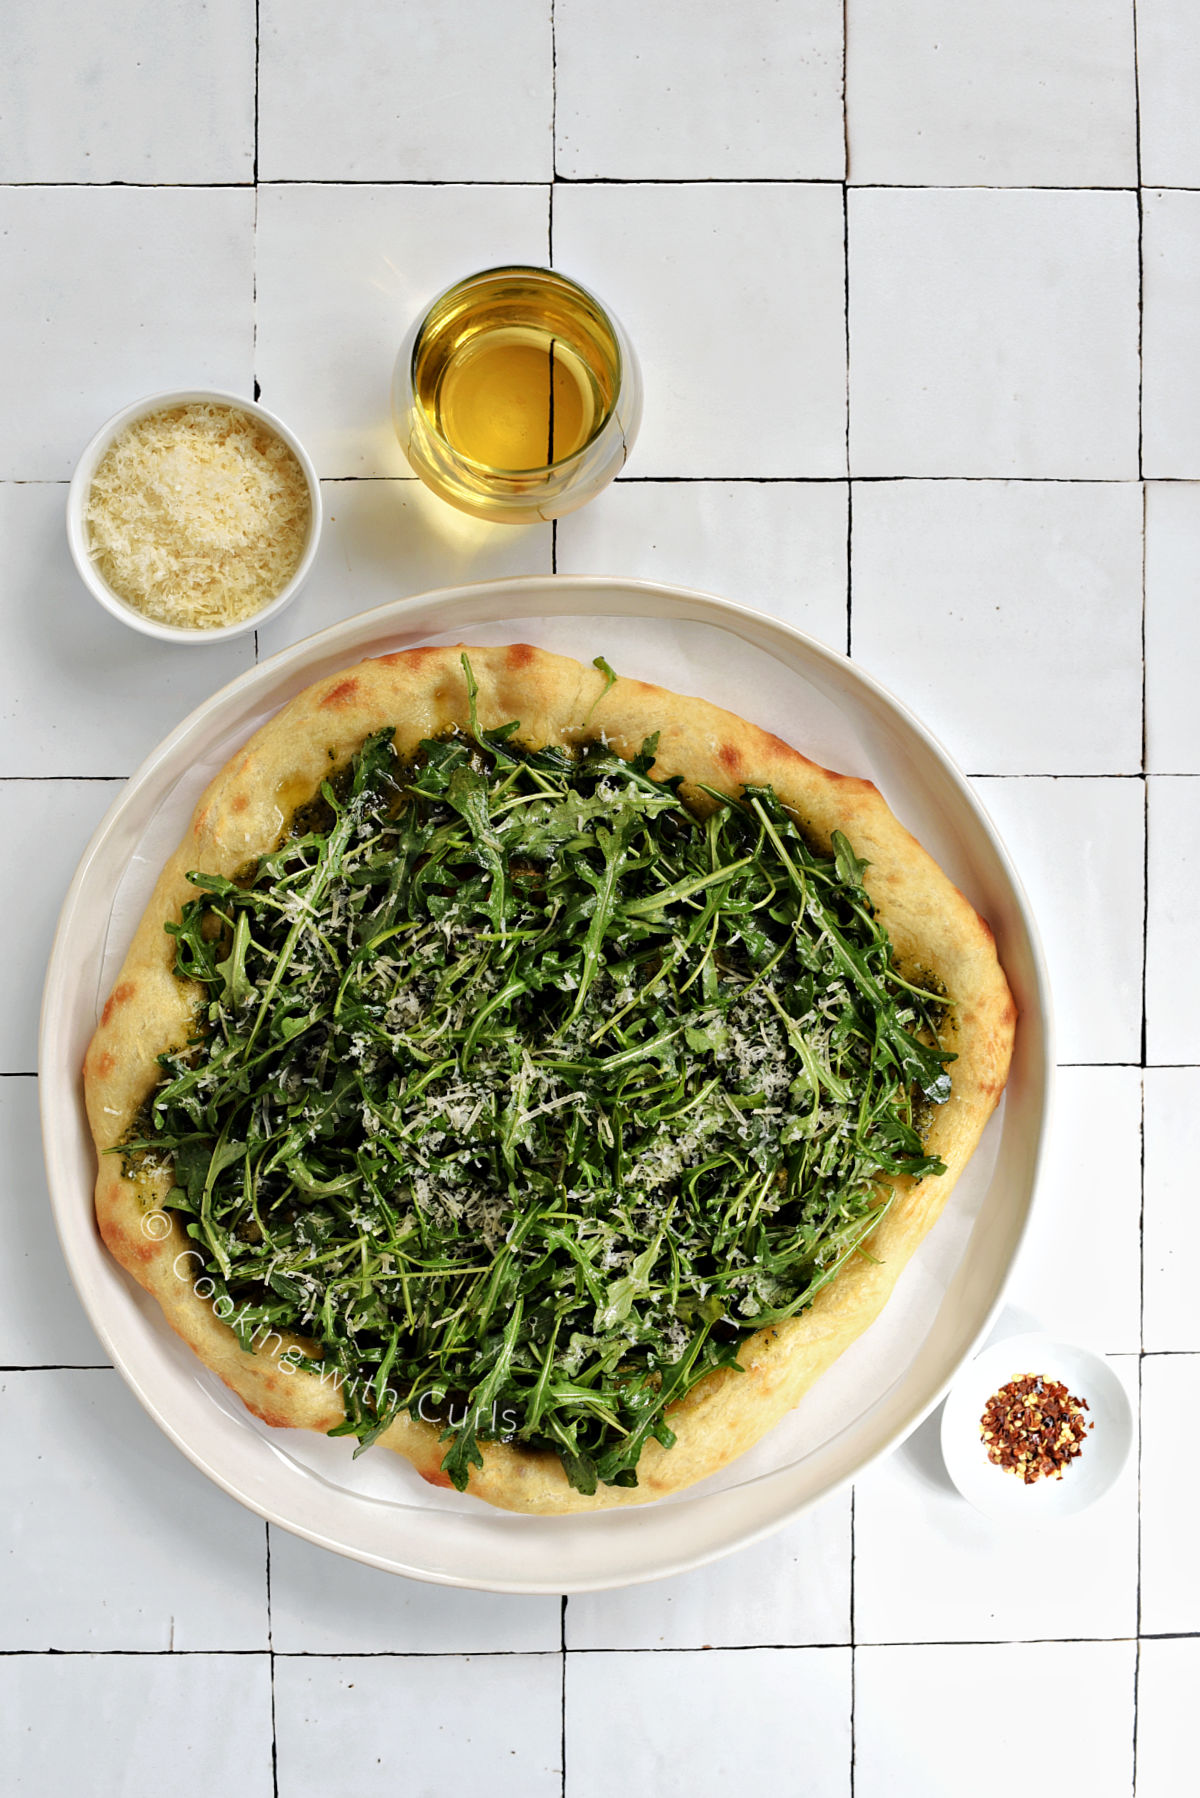 Looking down on a greens pizza topped with arugula, basil pesto, and grated parmesan cheese.